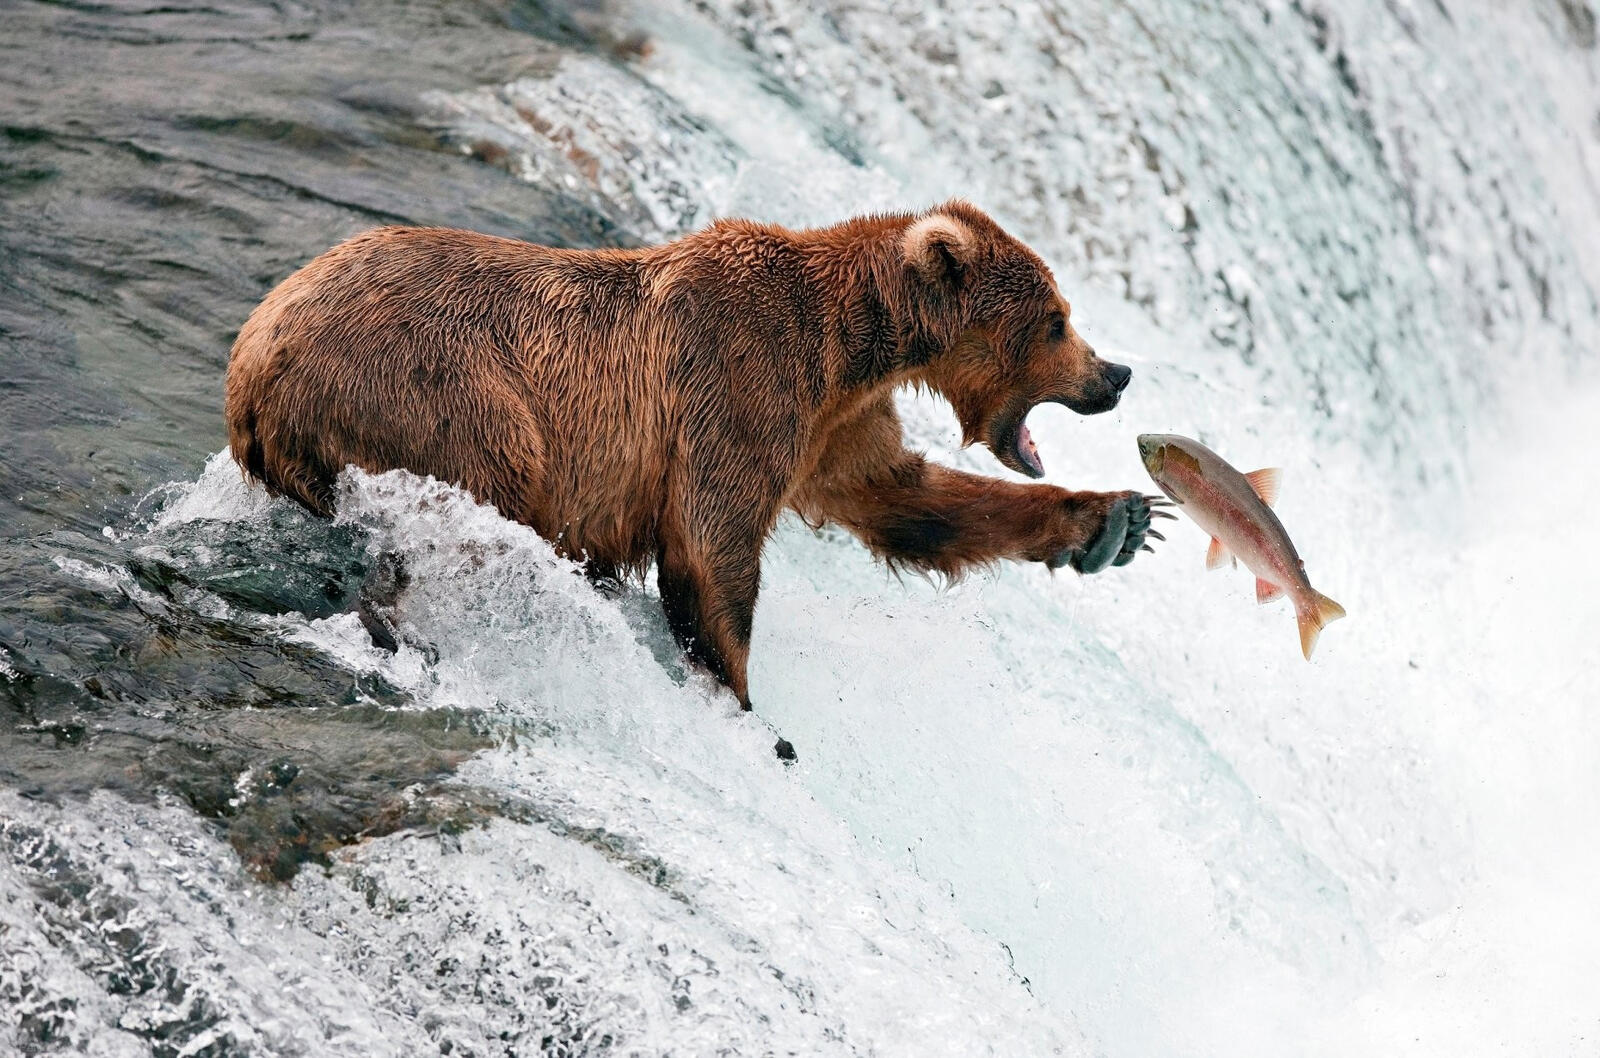 Free photo A bear catches fish at a waterfall